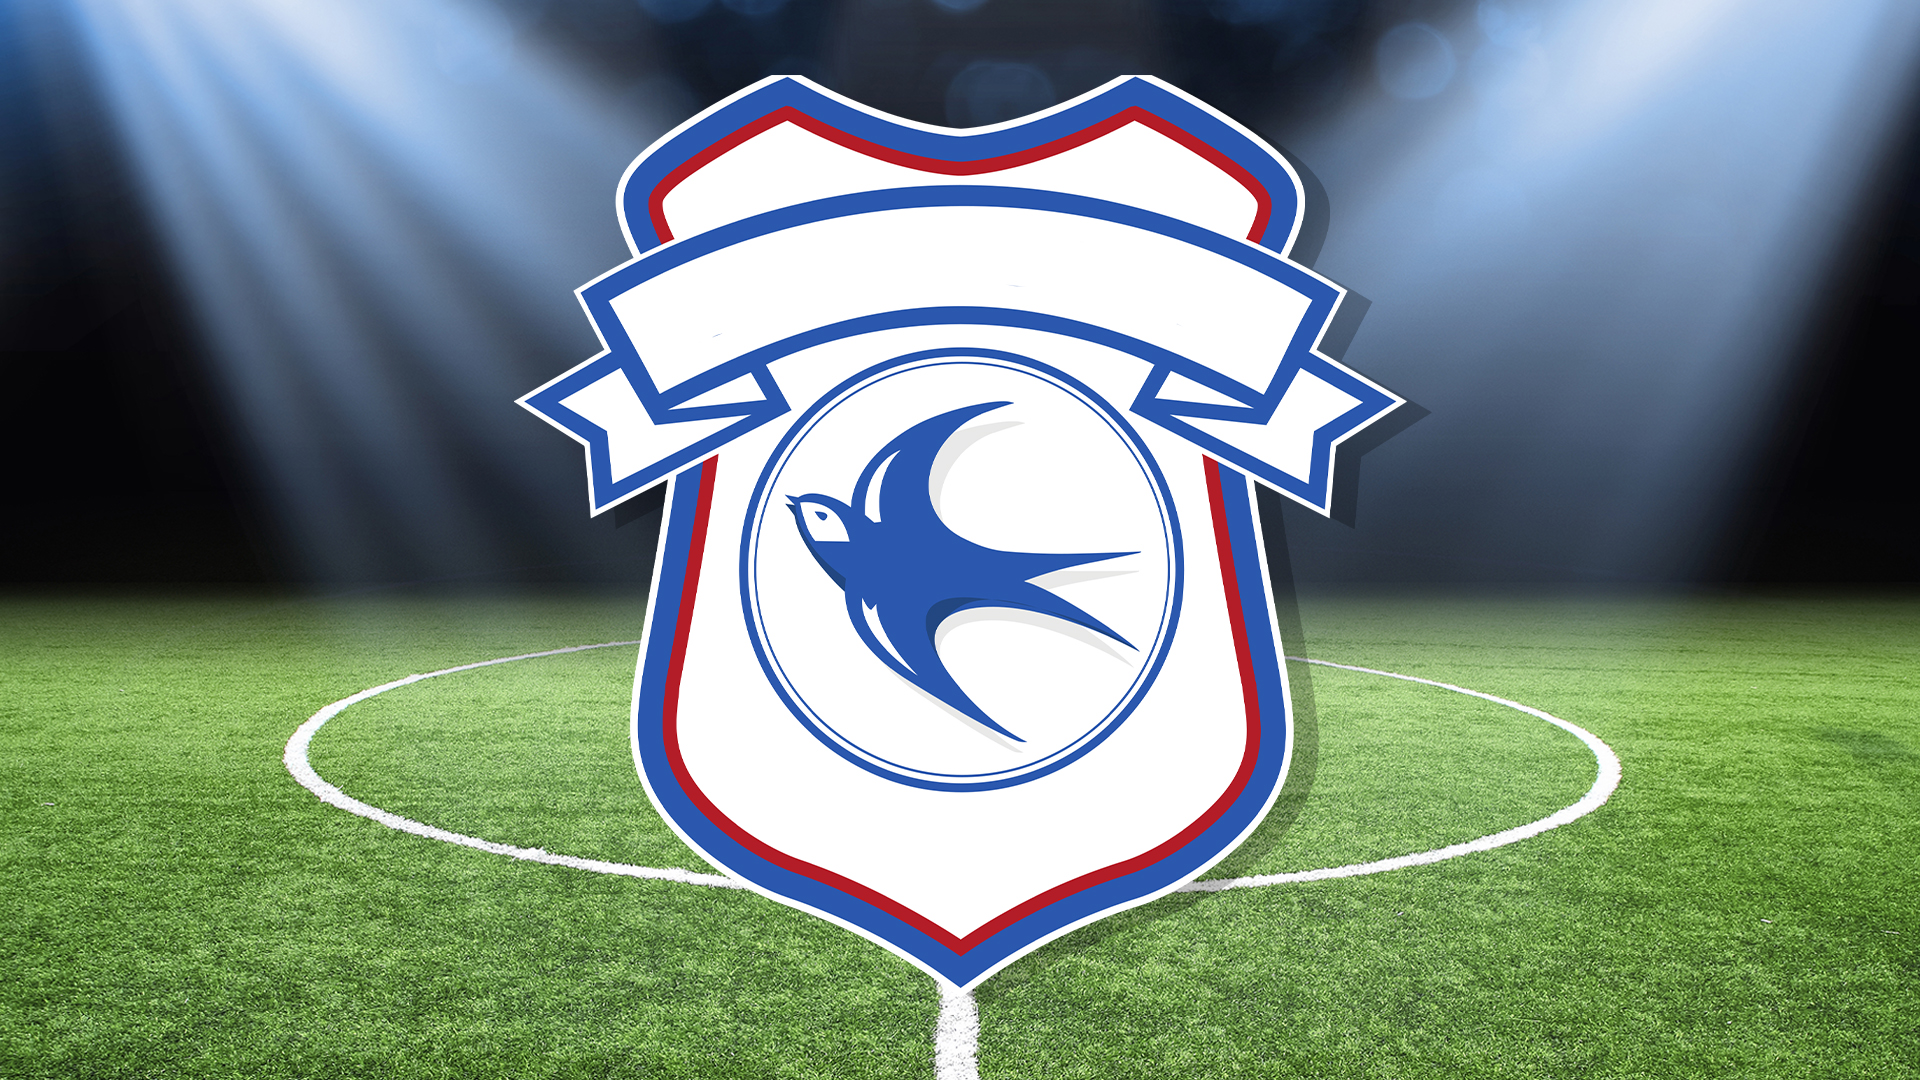 Football Club Badge Picture Quiz : r/freequizzes